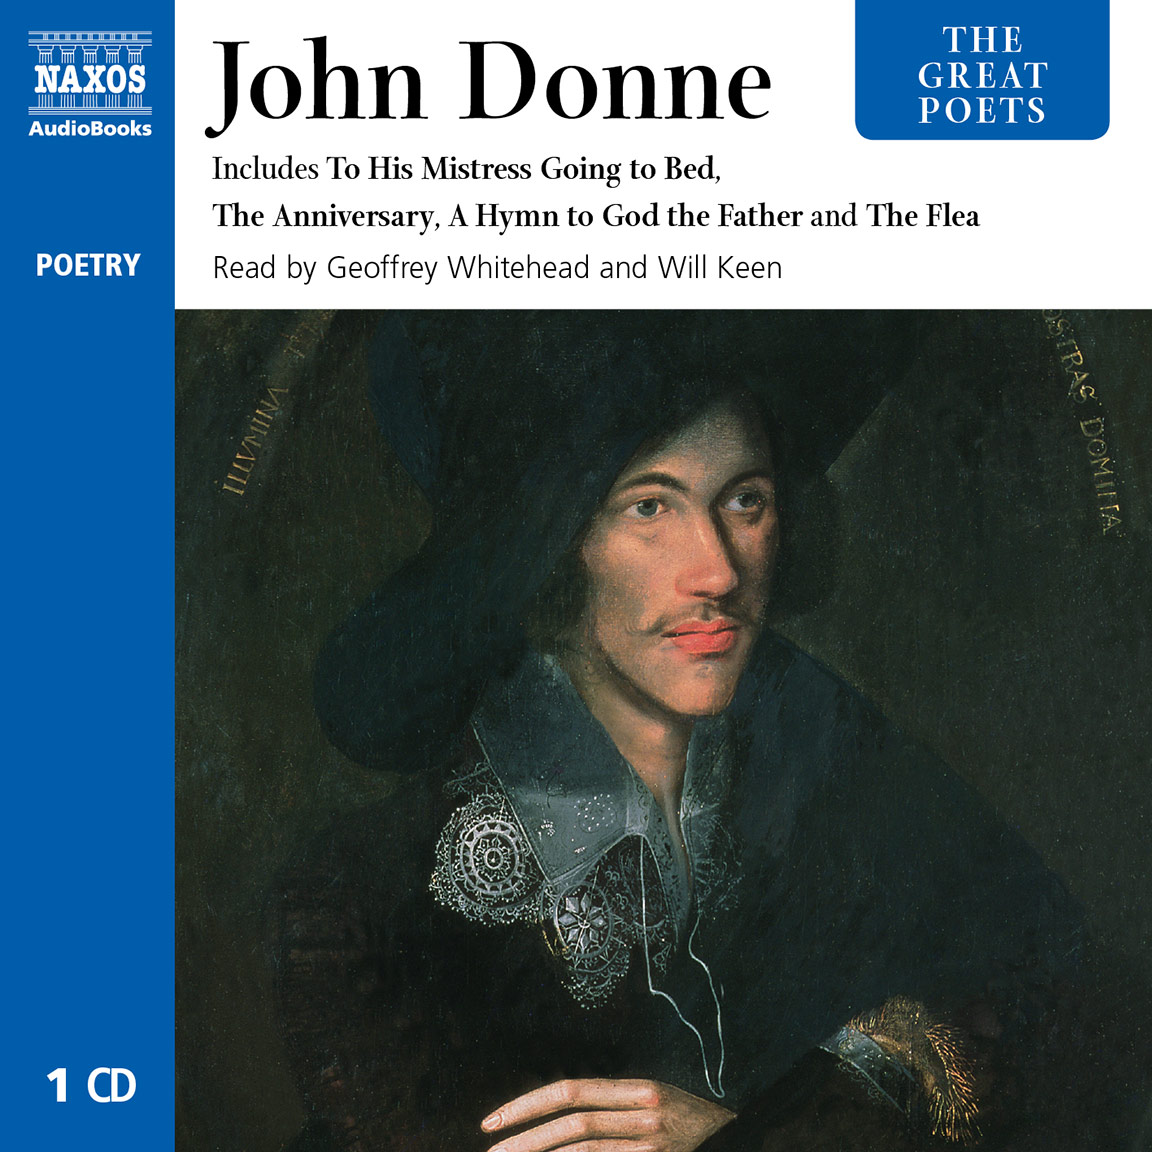 Greatest poet. John donne книги. Поэт Джон хоум. John donne in Youth. John donne: collected Poetry.